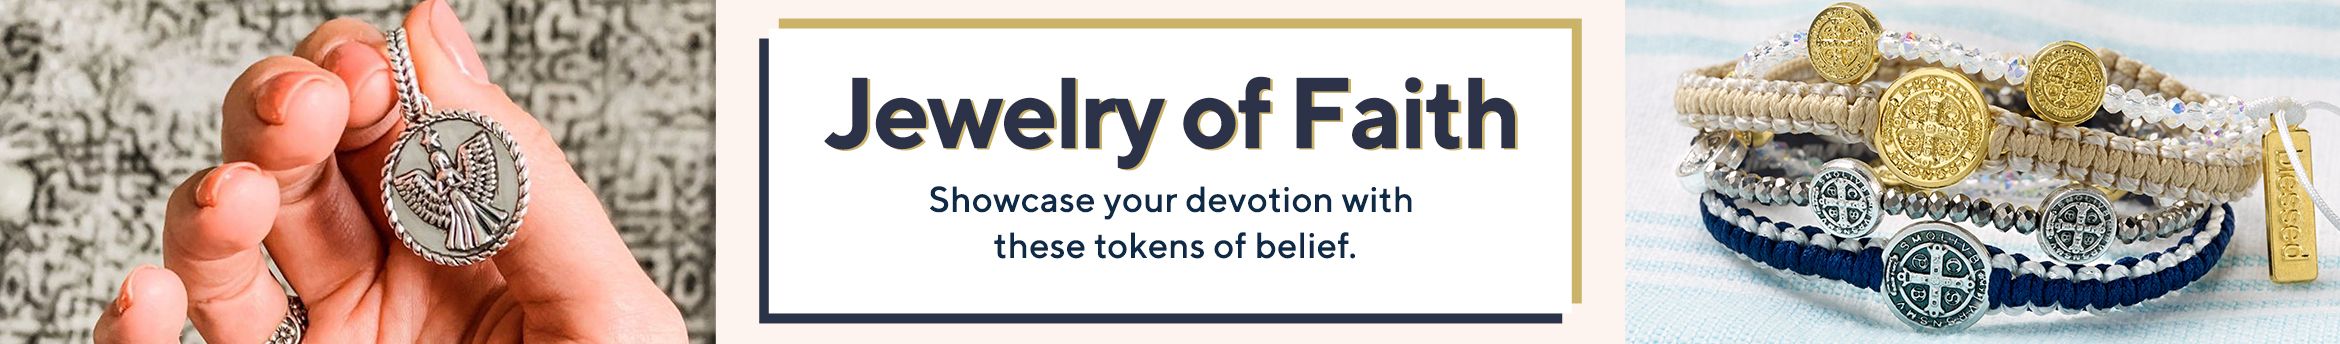 Jewelry of Faith.  Showcase your devotion with these tokens of belief.